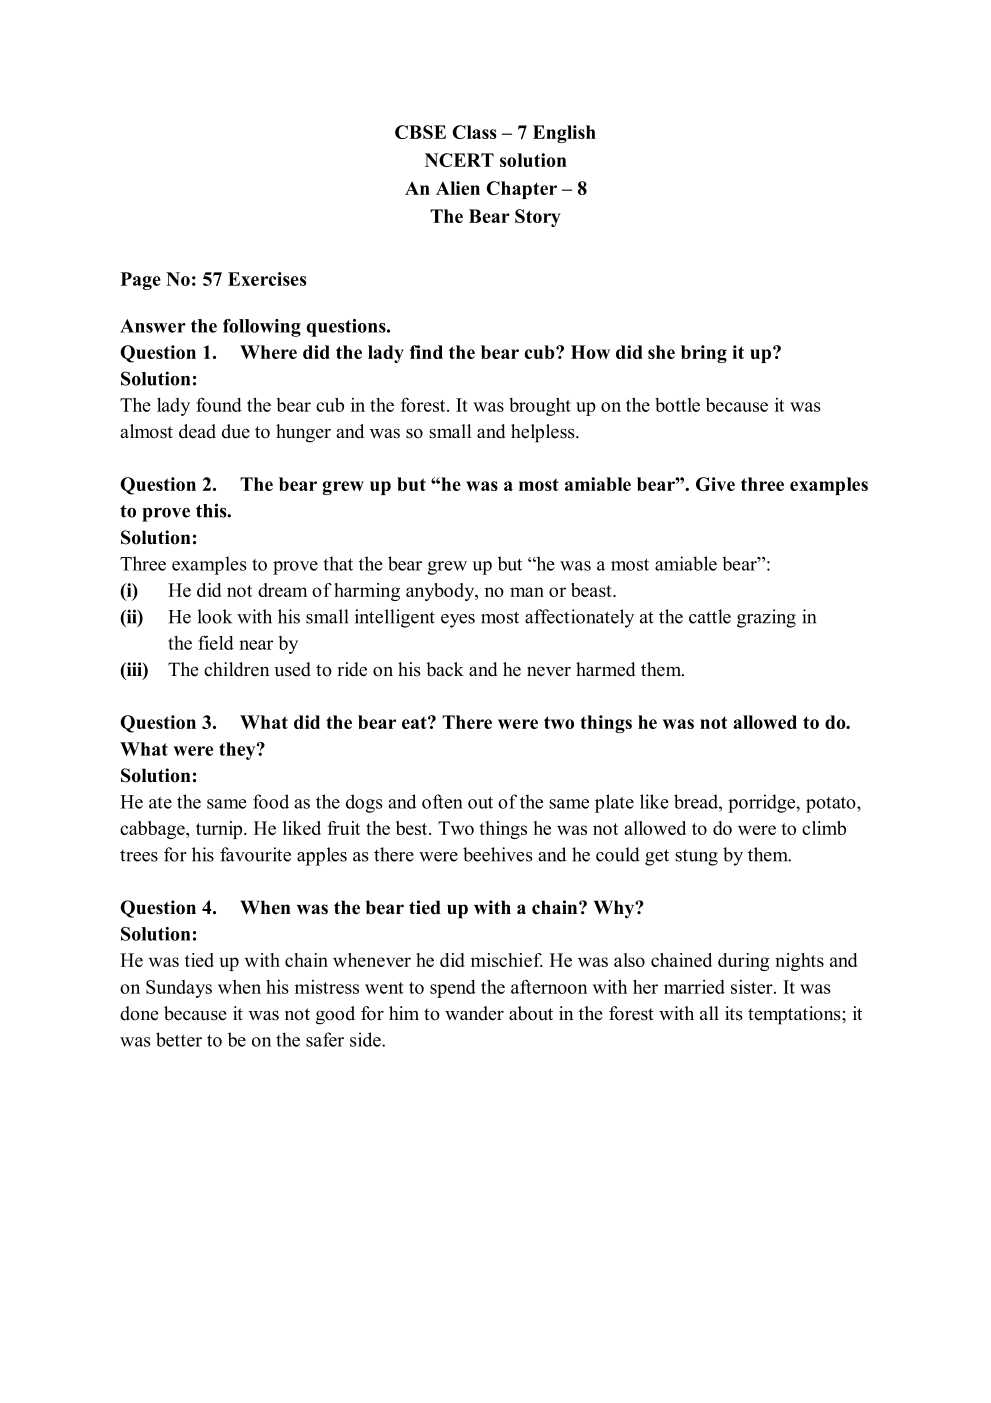 NCERT Solutions For Class 7 English An Alien Hand Chapter 8 The Bear Story